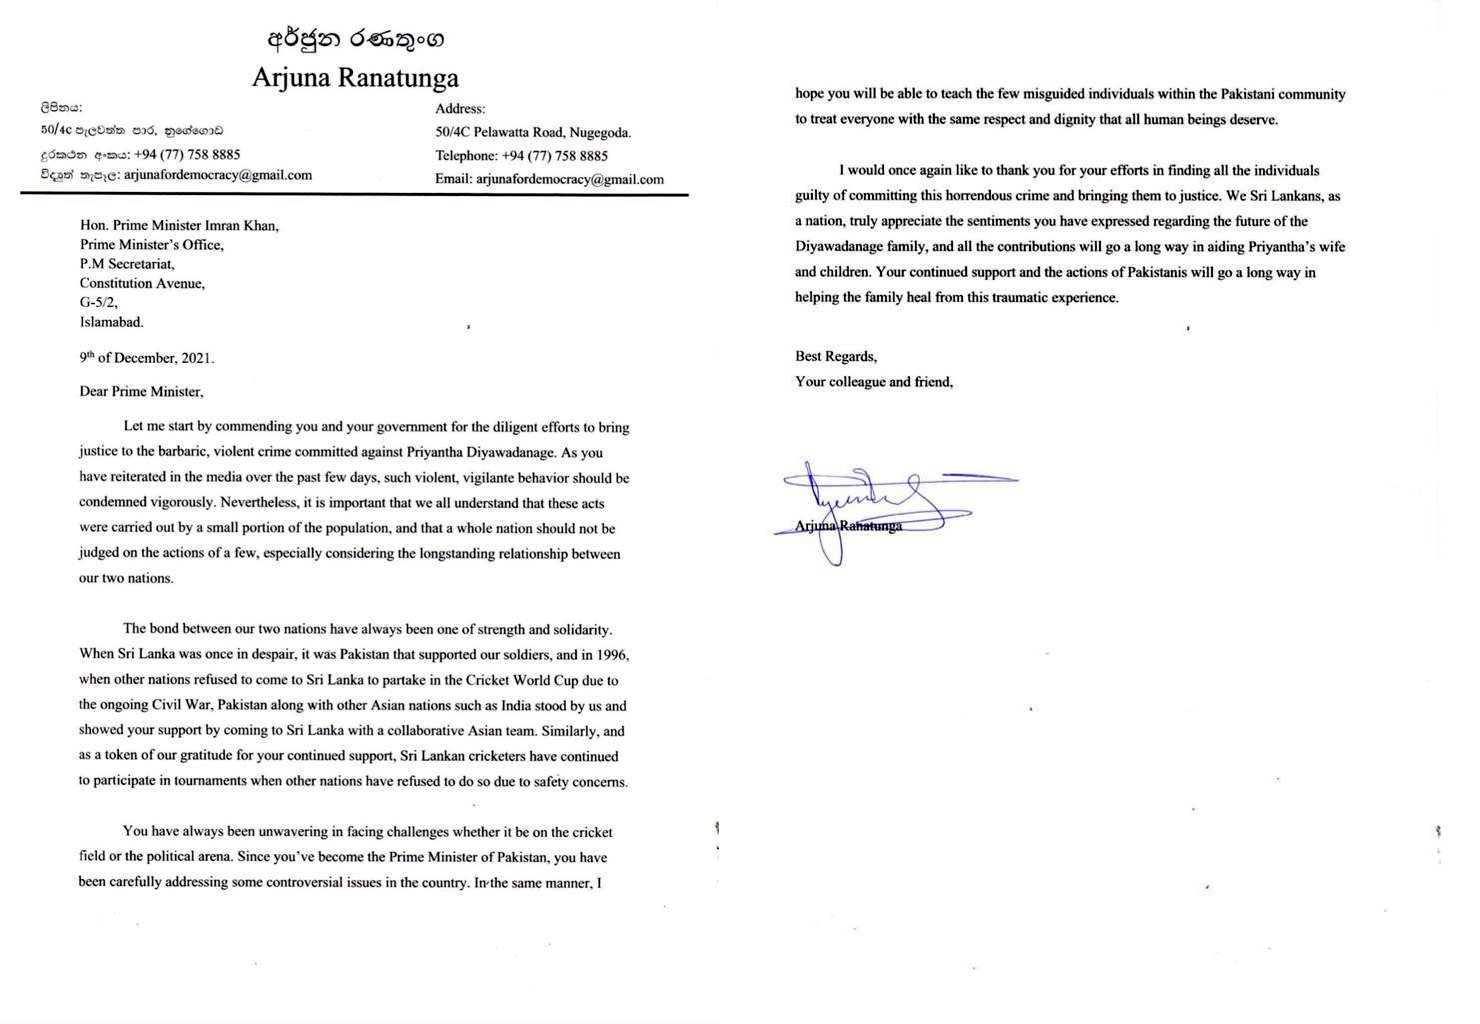 Picture of Letter from Rana Tanga to Prime Minister Imran Khan